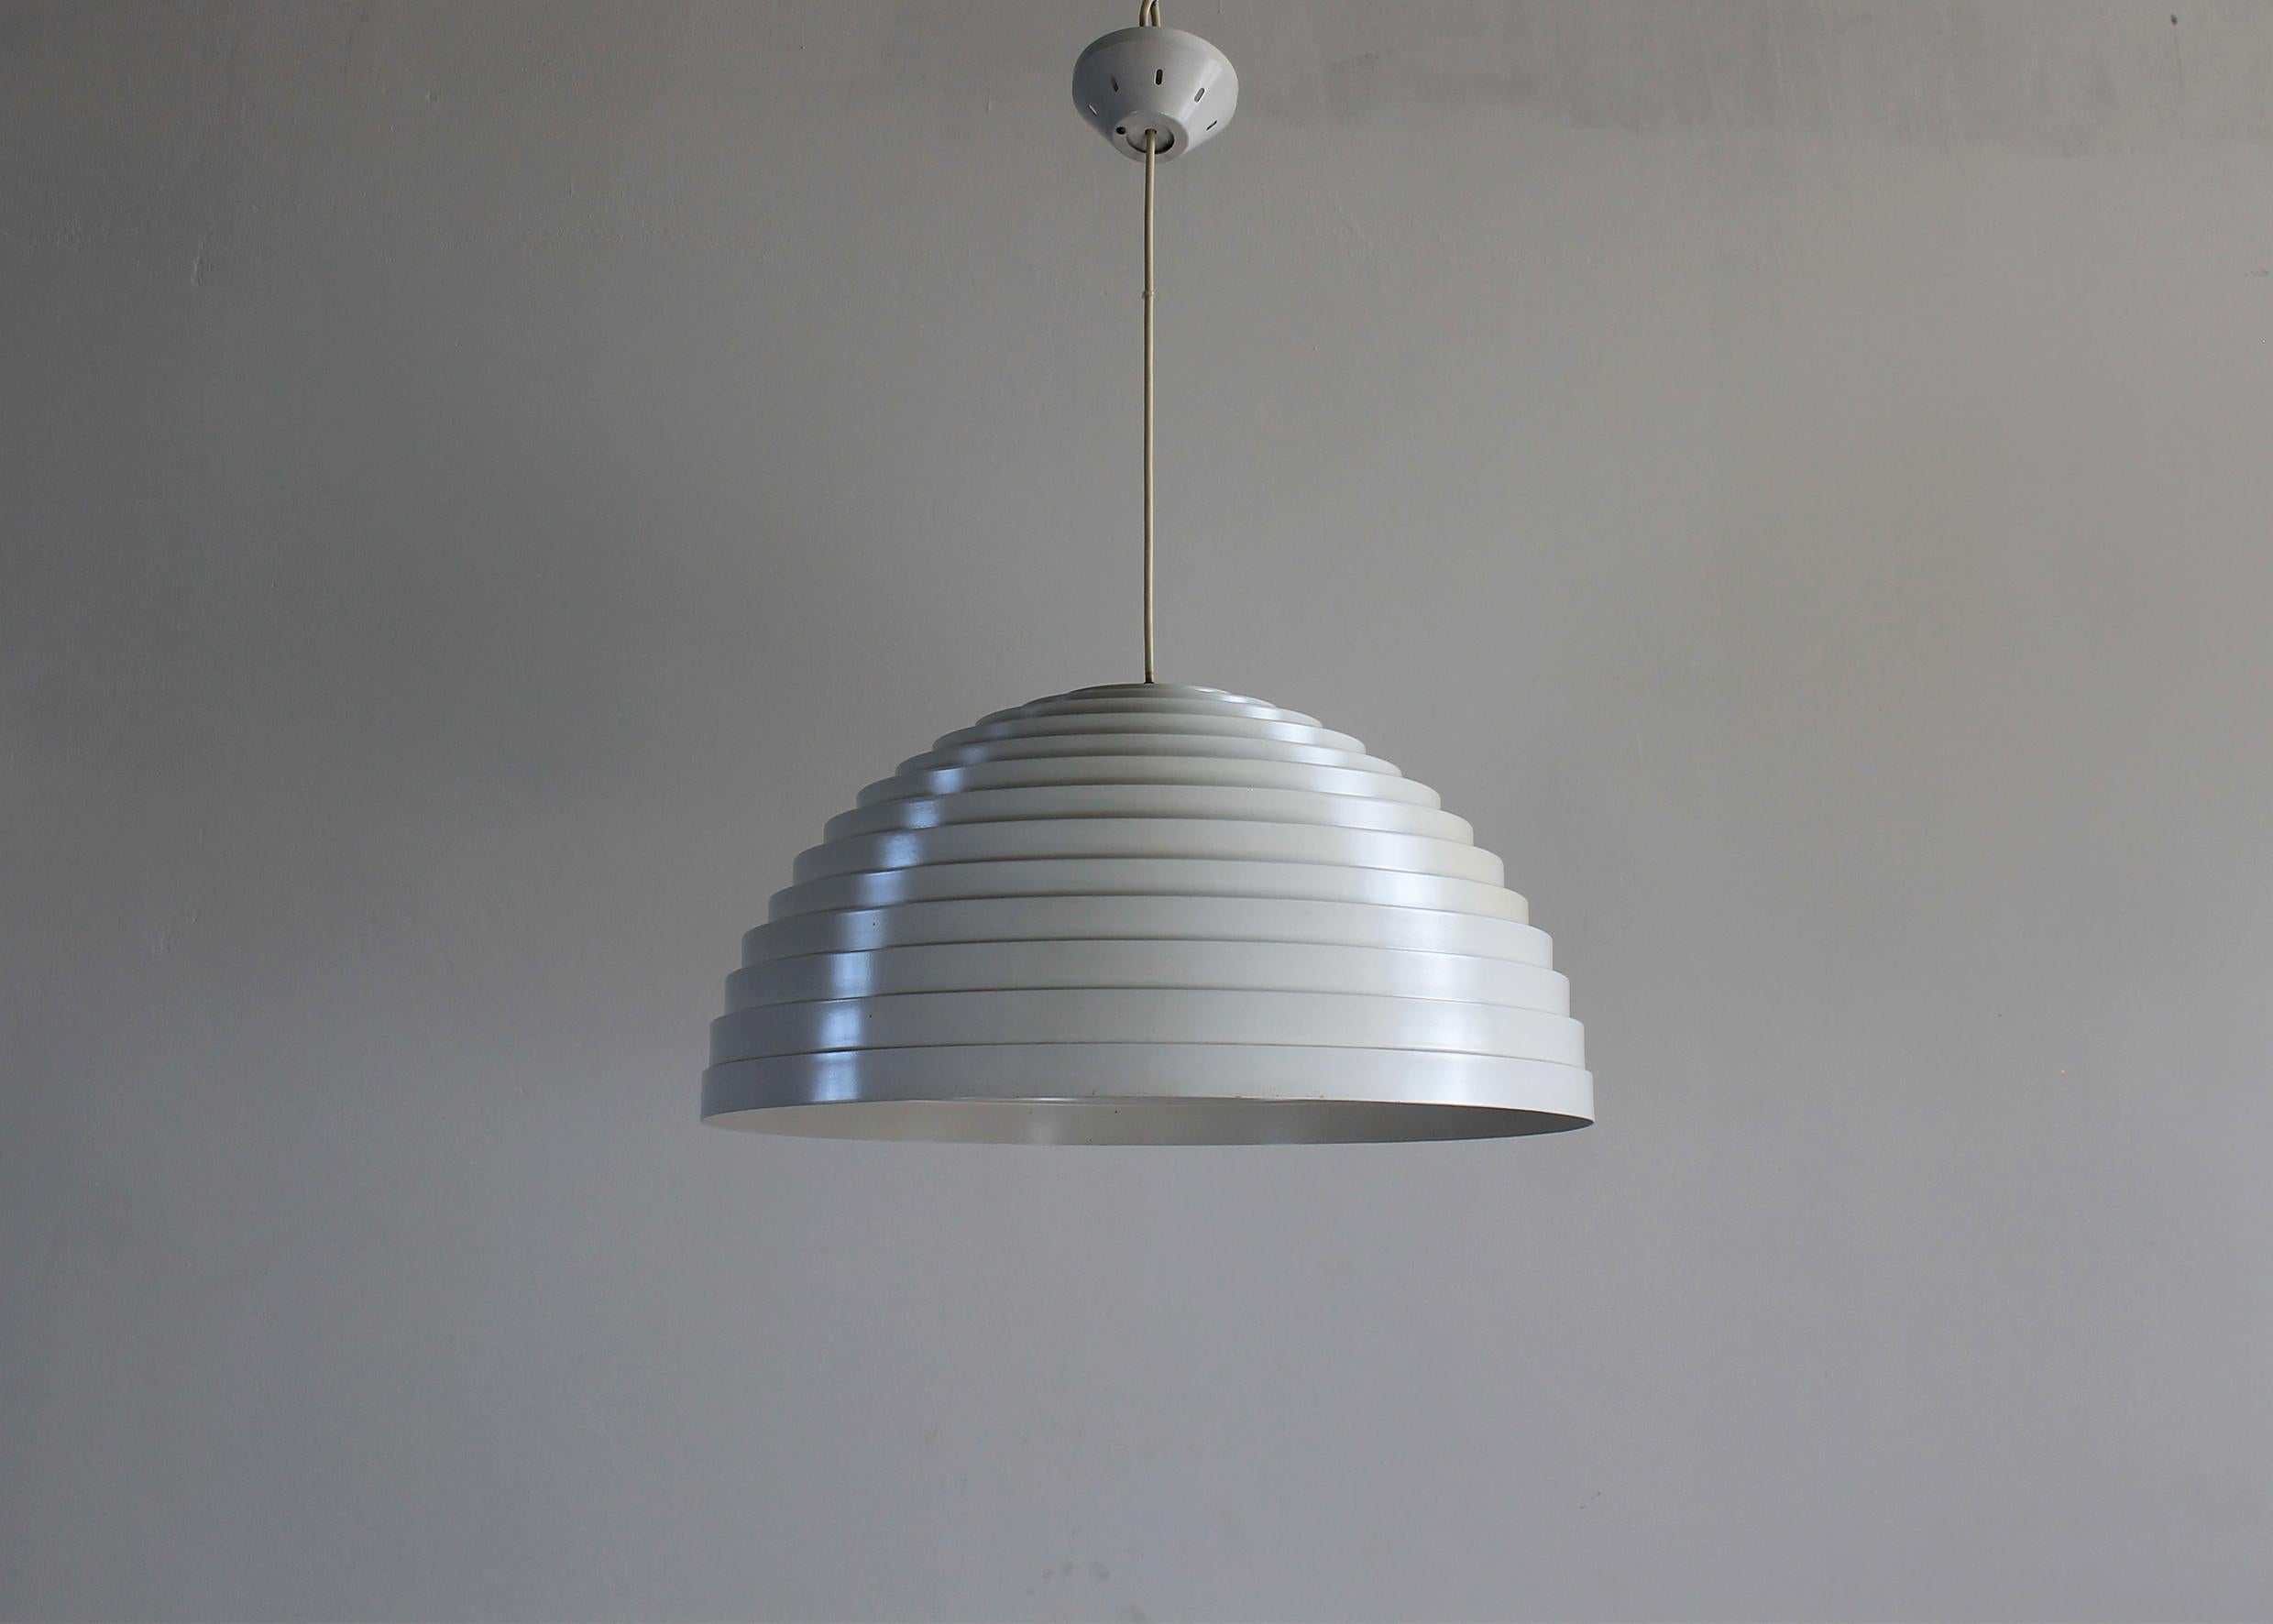 A rare ceiling lamp or chandelier (model Step) with a semisphere lampshade in white lacquered aluminum, it was designed by Elio Martinelli and produced by the Italian company, Martinelli Luce during the 1970s. 

The concentric shapes repeated in a